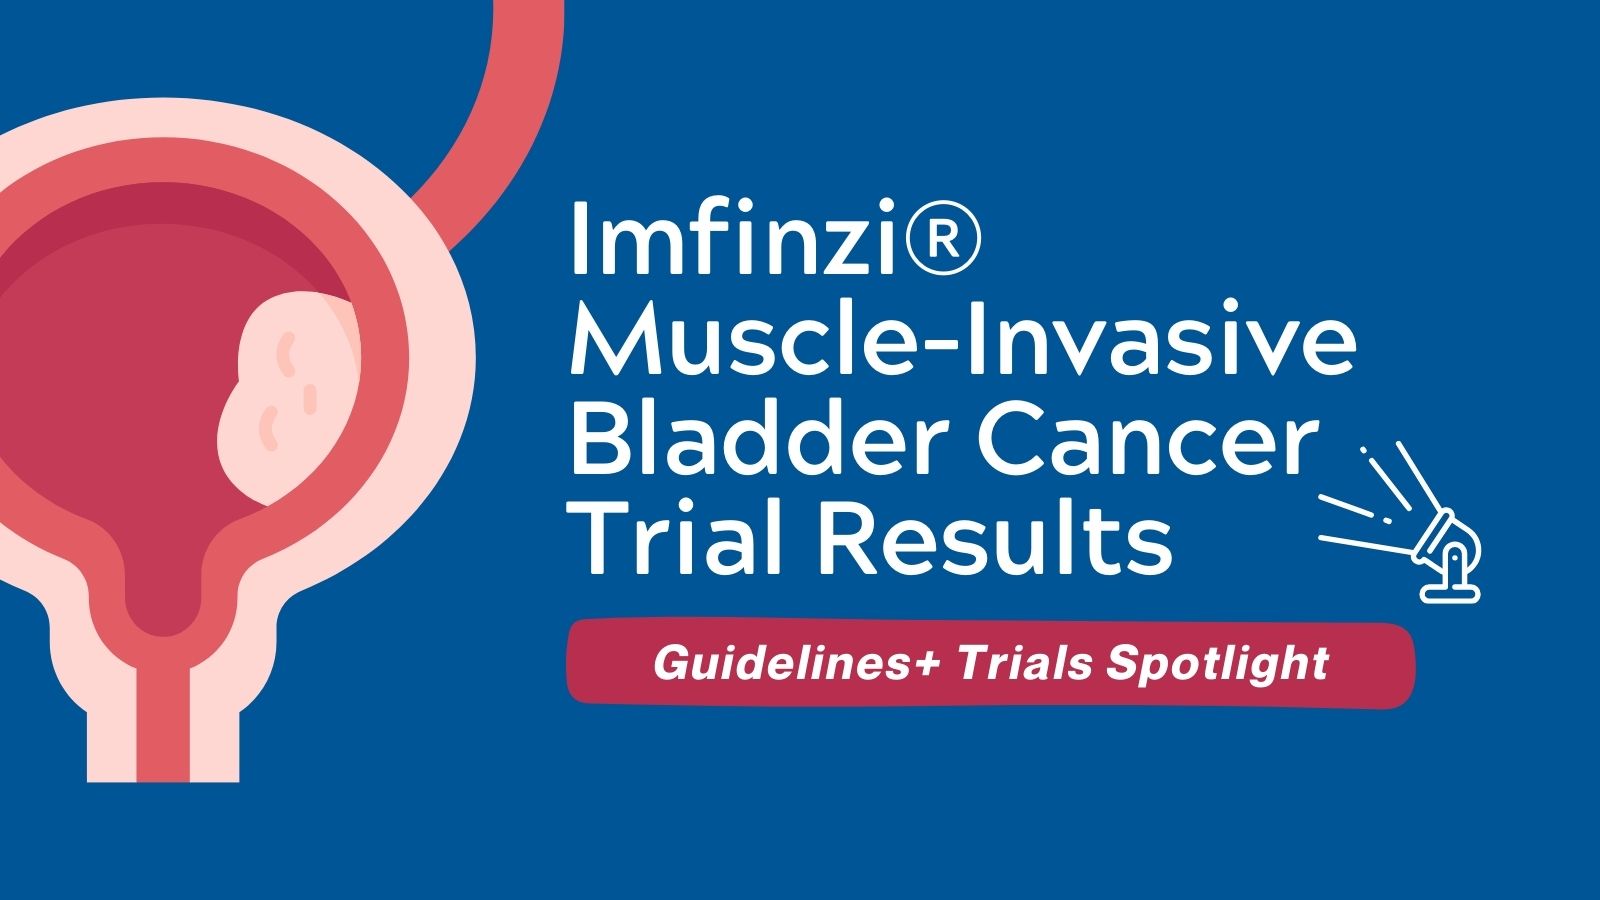 Guidelines+ Trials Spotlight - Imfinzi® Muscle-Invasive Bladder Cancer Trial Results NIAGARA